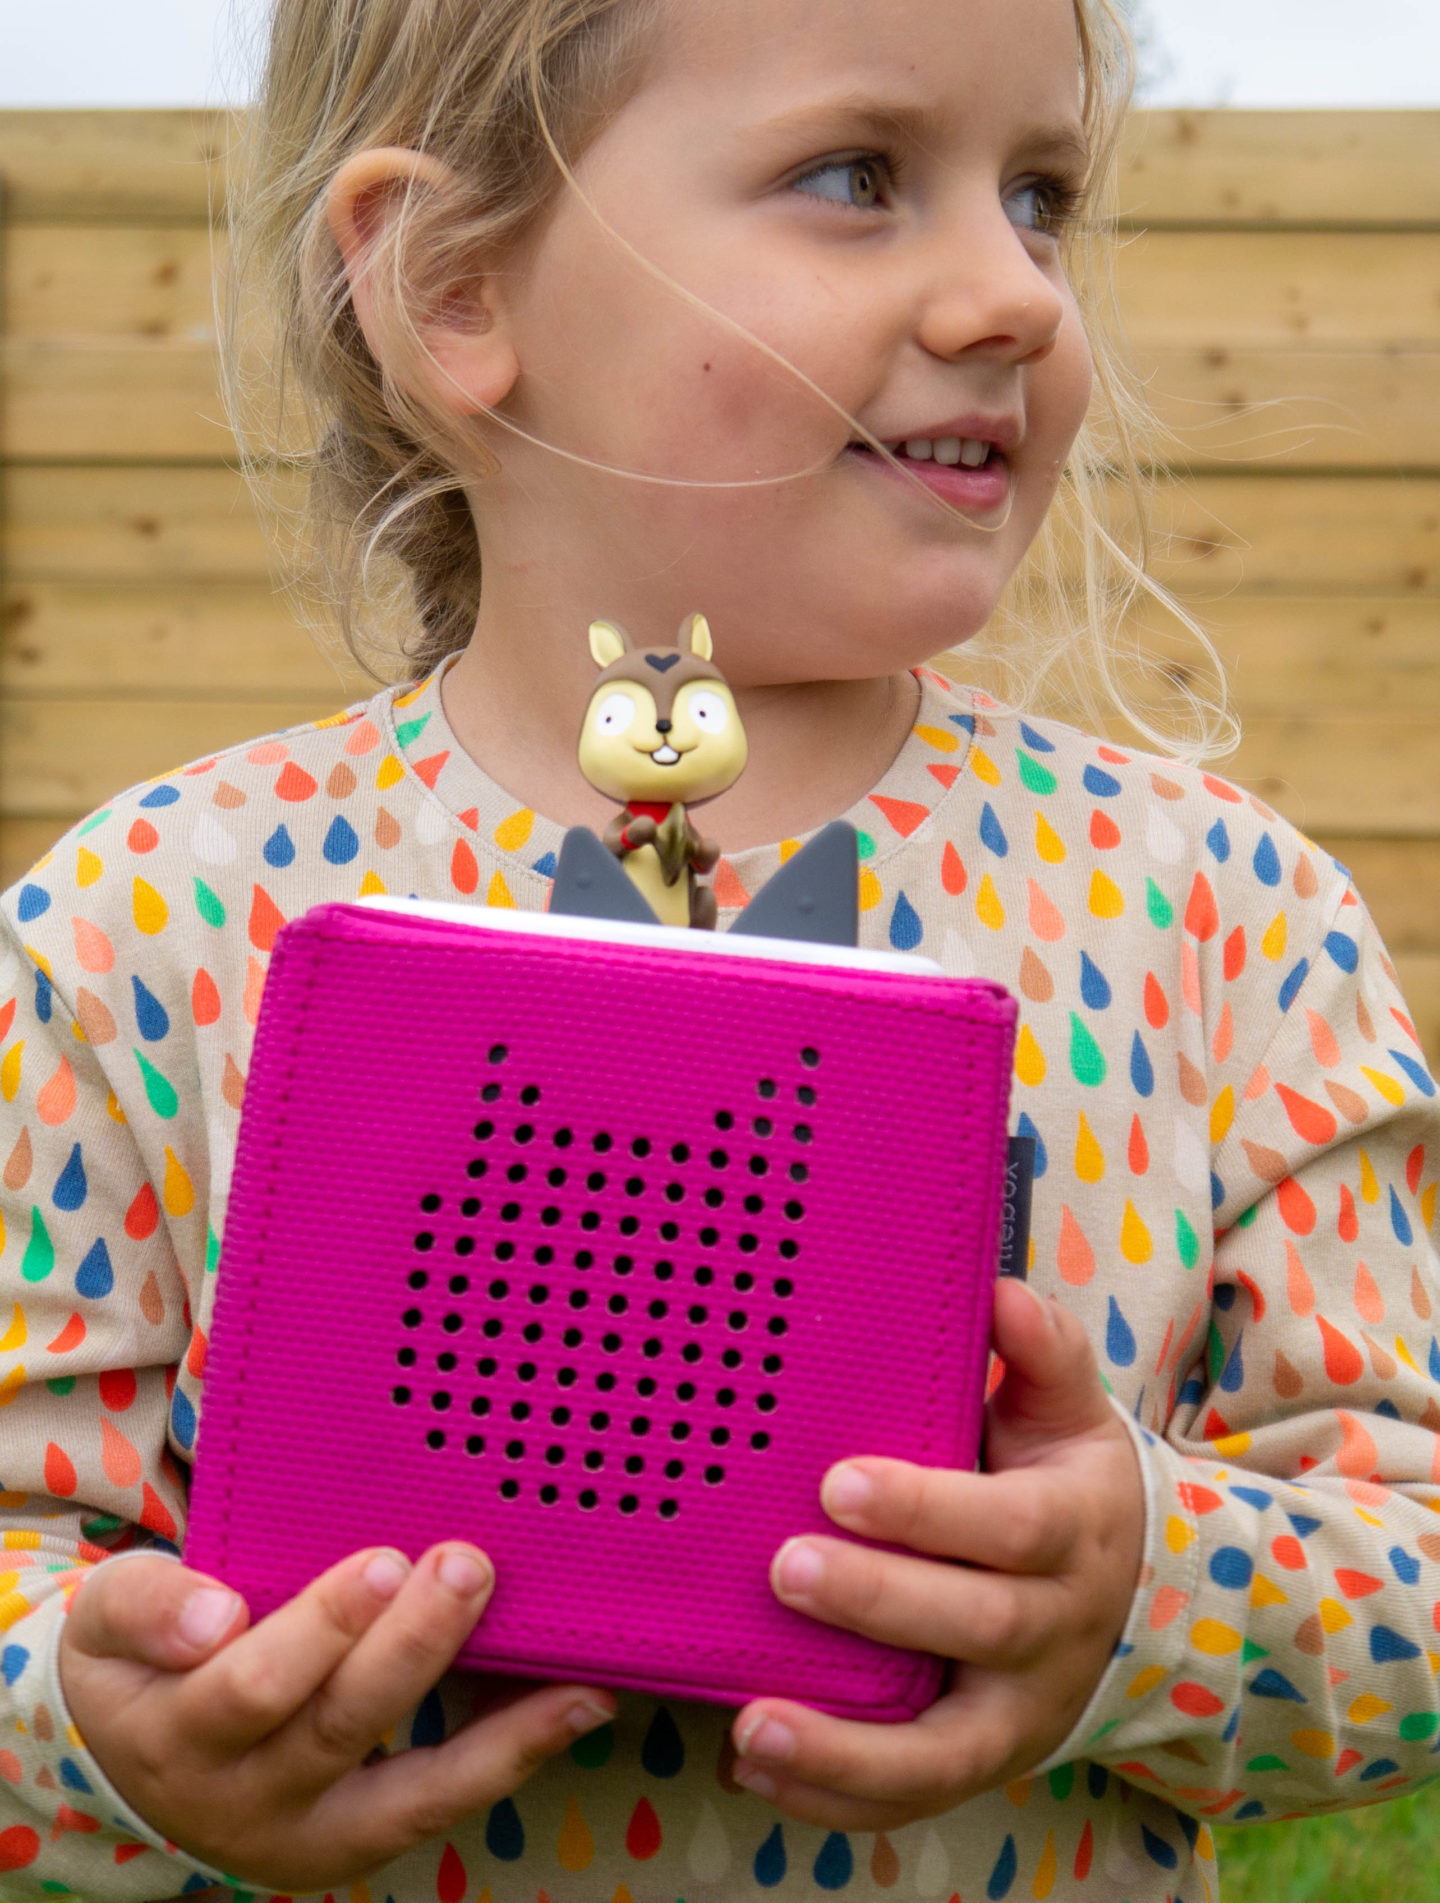 The Toniebox is a great gadget for children.